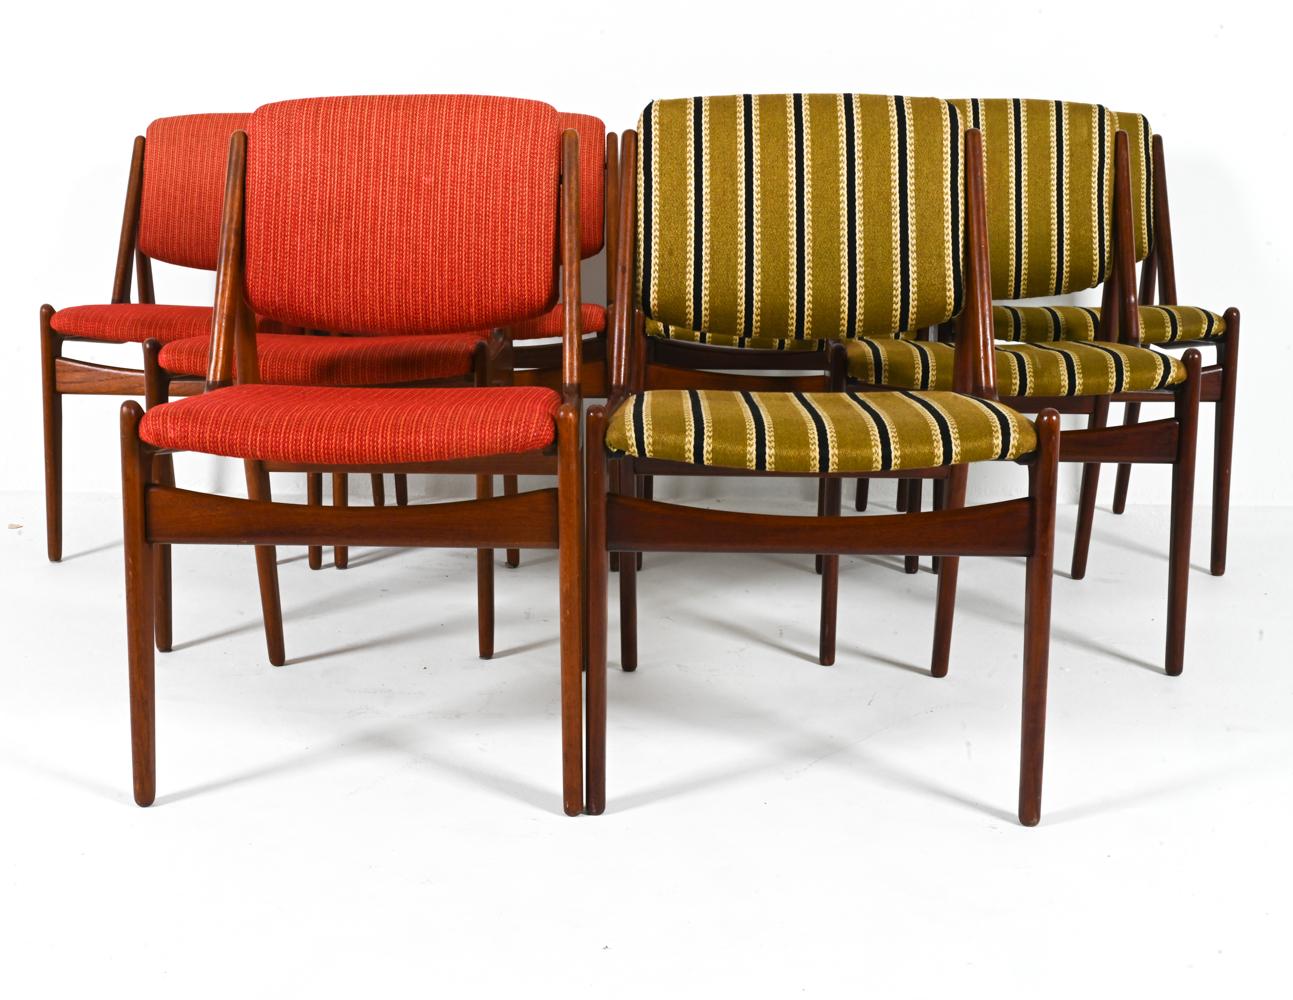 Experience the epitome of Danish craftsmanship with this exquisite set of (8) 'Ella' dining chairs, designed by the renowned Arne Vodder and Anton Borg and produced by Vamo Møbelfabrik in the 1960's. Crafted with precision and elegance, these chairs